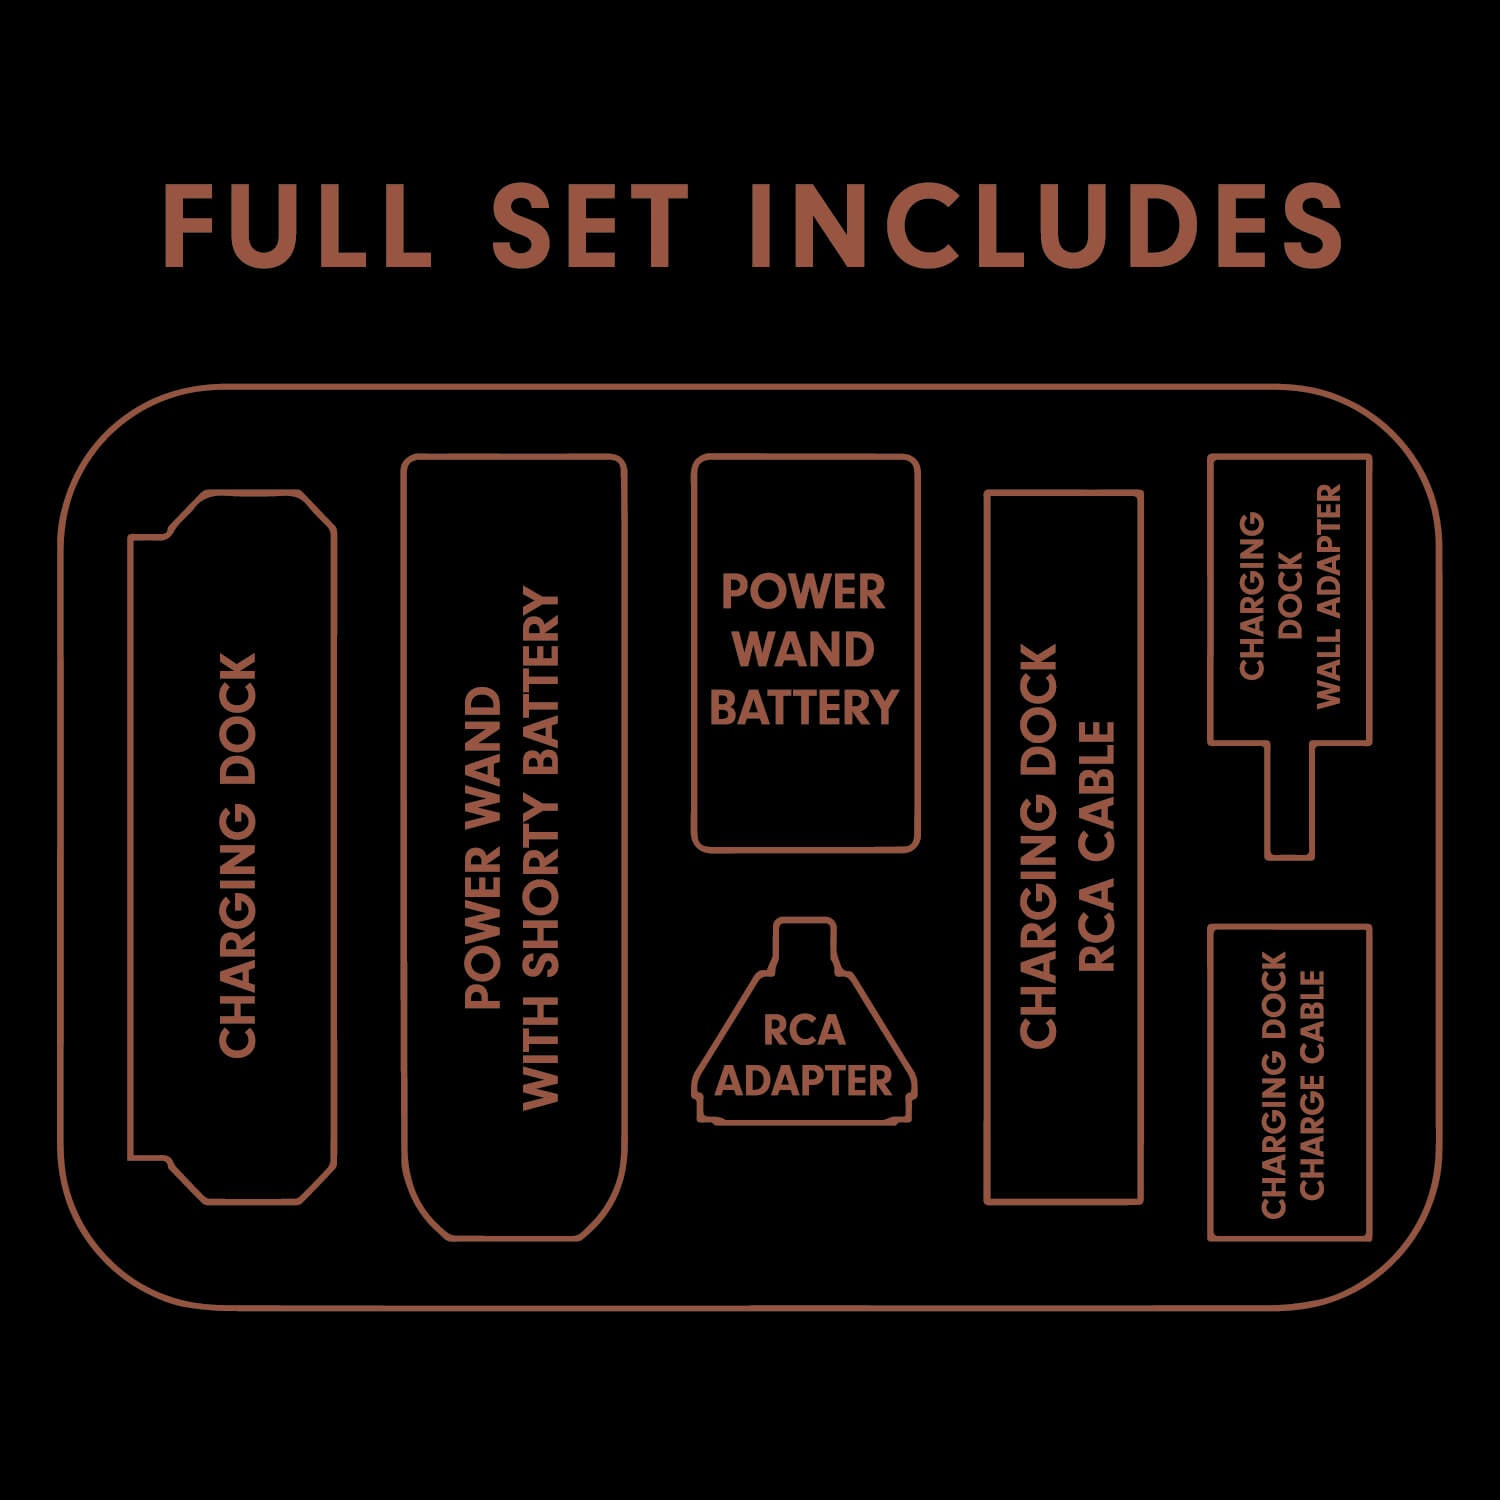 Diagram showing everything the Bishop Power Wand full set includes